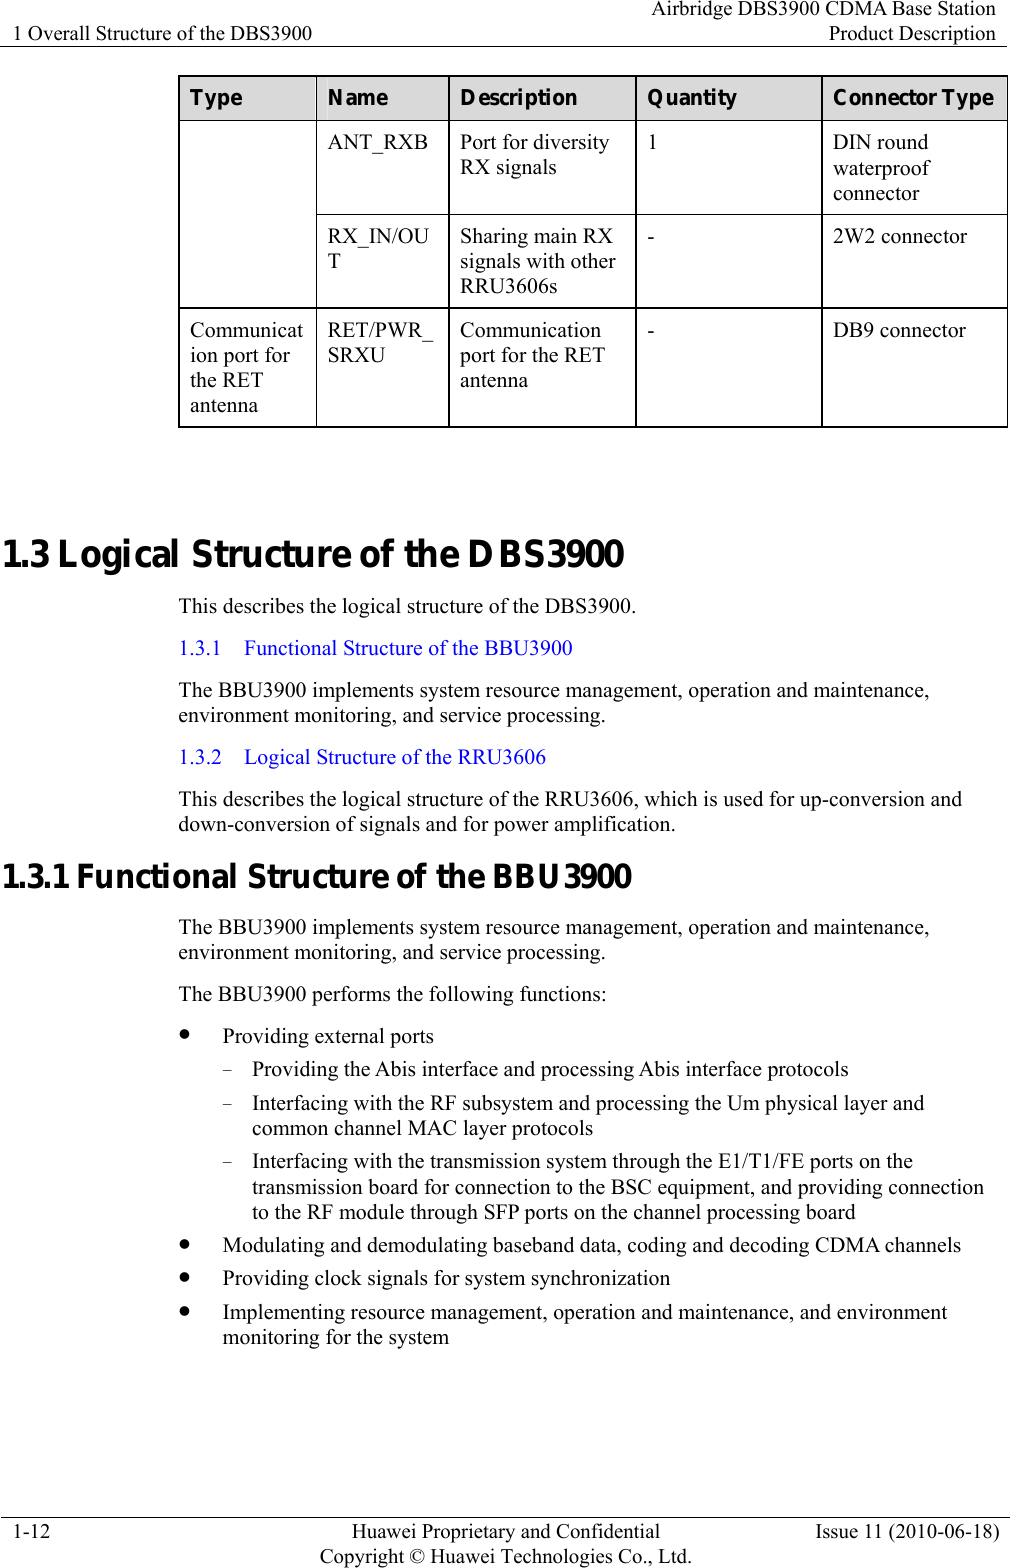 1 Overall Structure of the DBS3900 Airbridge DBS3900 CDMA Base StationProduct Description 1-12  Huawei Proprietary and Confidential     Copyright © Huawei Technologies Co., Ltd.Issue 11 (2010-06-18) Type   Name  Description   Quantity  Connector Type  ANT_RXB  Port for diversity RX signals   1 DIN round waterproof connector  RX_IN/OUT Sharing main RX signals with other RRU3606s  - 2W2 connector Communication port for the RET antenna  RET/PWR_SRXU Communication port for the RET antenna  - DB9 connector  1.3 Logical Structure of the DBS3900 This describes the logical structure of the DBS3900. 1.3.1    Functional Structure of the BBU3900 The BBU3900 implements system resource management, operation and maintenance, environment monitoring, and service processing. 1.3.2    Logical Structure of the RRU3606 This describes the logical structure of the RRU3606, which is used for up-conversion and down-conversion of signals and for power amplification. 1.3.1 Functional Structure of the BBU3900 The BBU3900 implements system resource management, operation and maintenance, environment monitoring, and service processing. The BBU3900 performs the following functions: z Providing external ports − Providing the Abis interface and processing Abis interface protocols − Interfacing with the RF subsystem and processing the Um physical layer and common channel MAC layer protocols − Interfacing with the transmission system through the E1/T1/FE ports on the transmission board for connection to the BSC equipment, and providing connection to the RF module through SFP ports on the channel processing board z Modulating and demodulating baseband data, coding and decoding CDMA channels z Providing clock signals for system synchronization z Implementing resource management, operation and maintenance, and environment monitoring for the system 